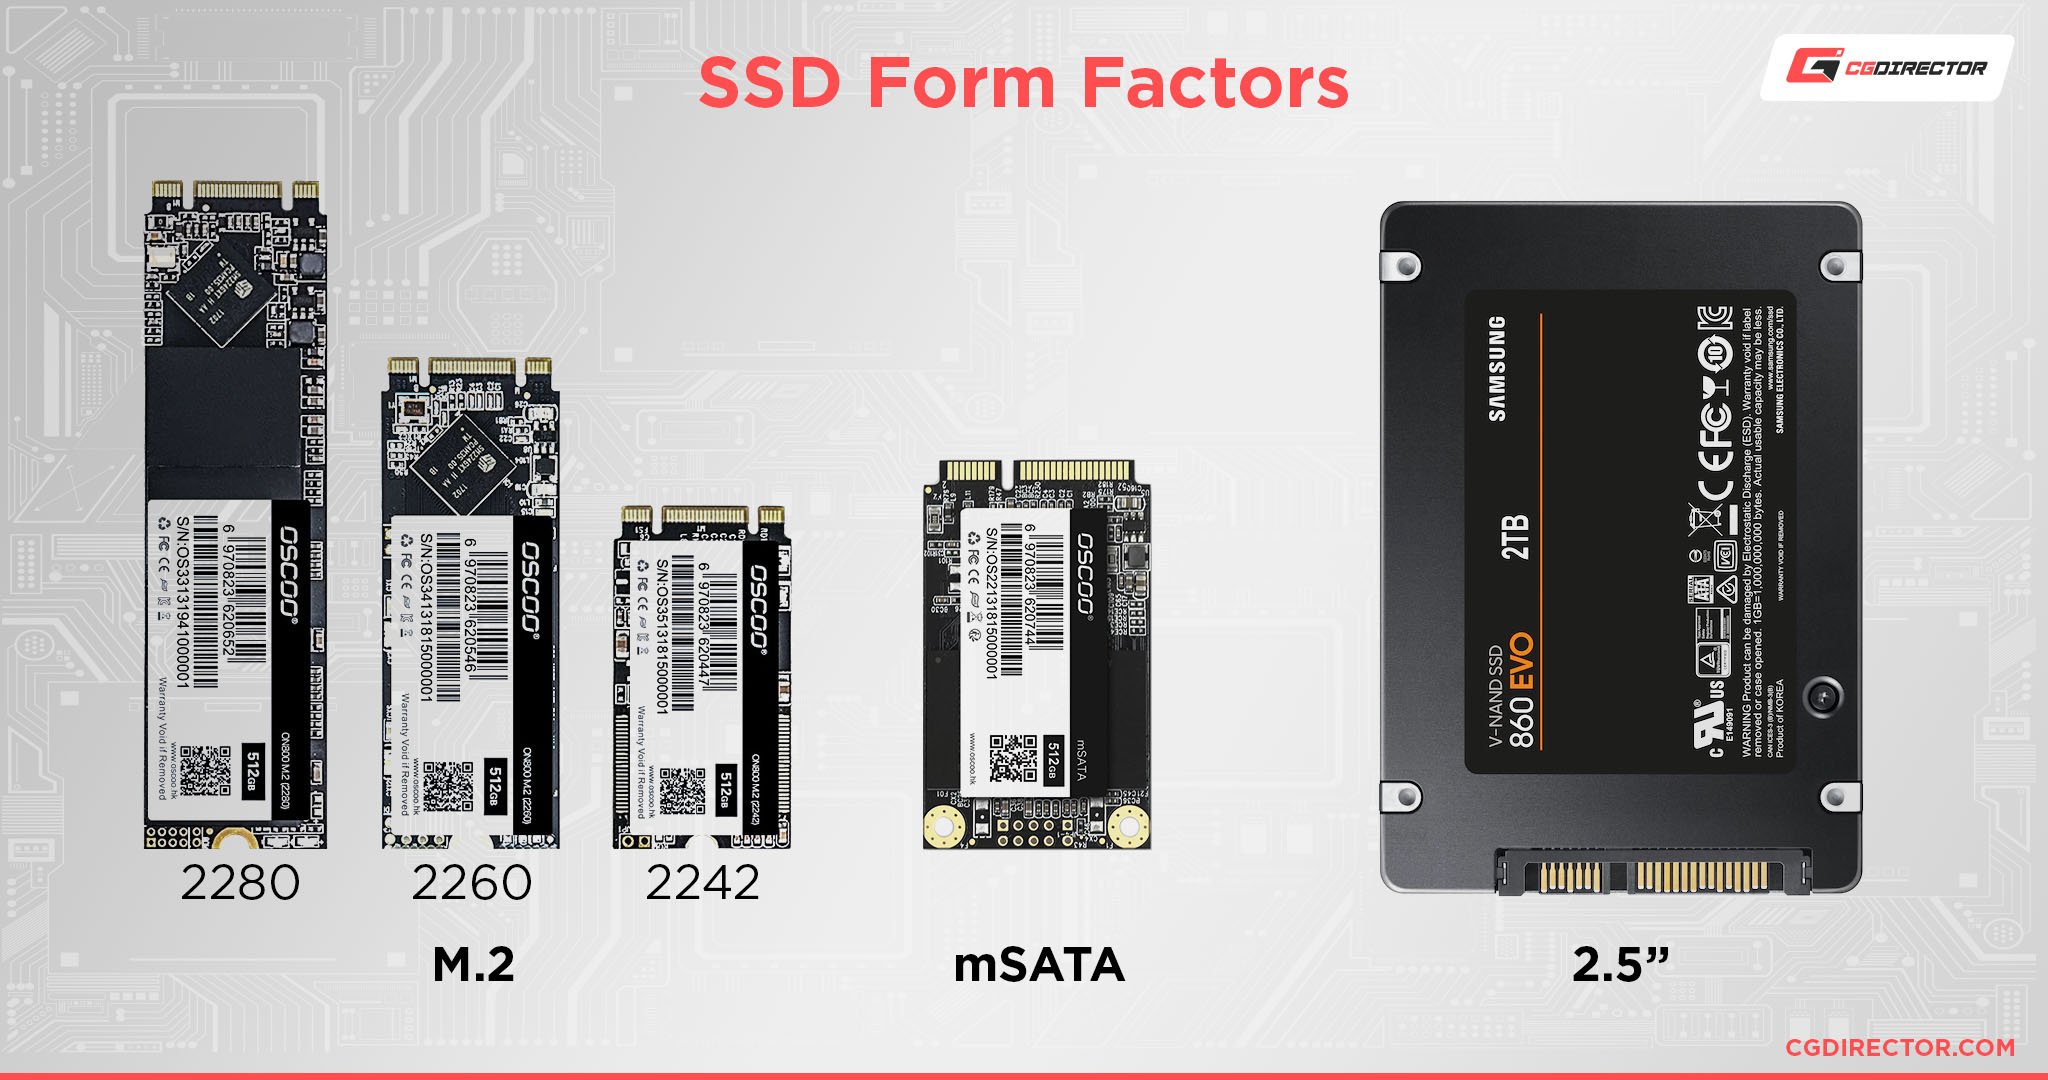 vs SSD - The Difference?